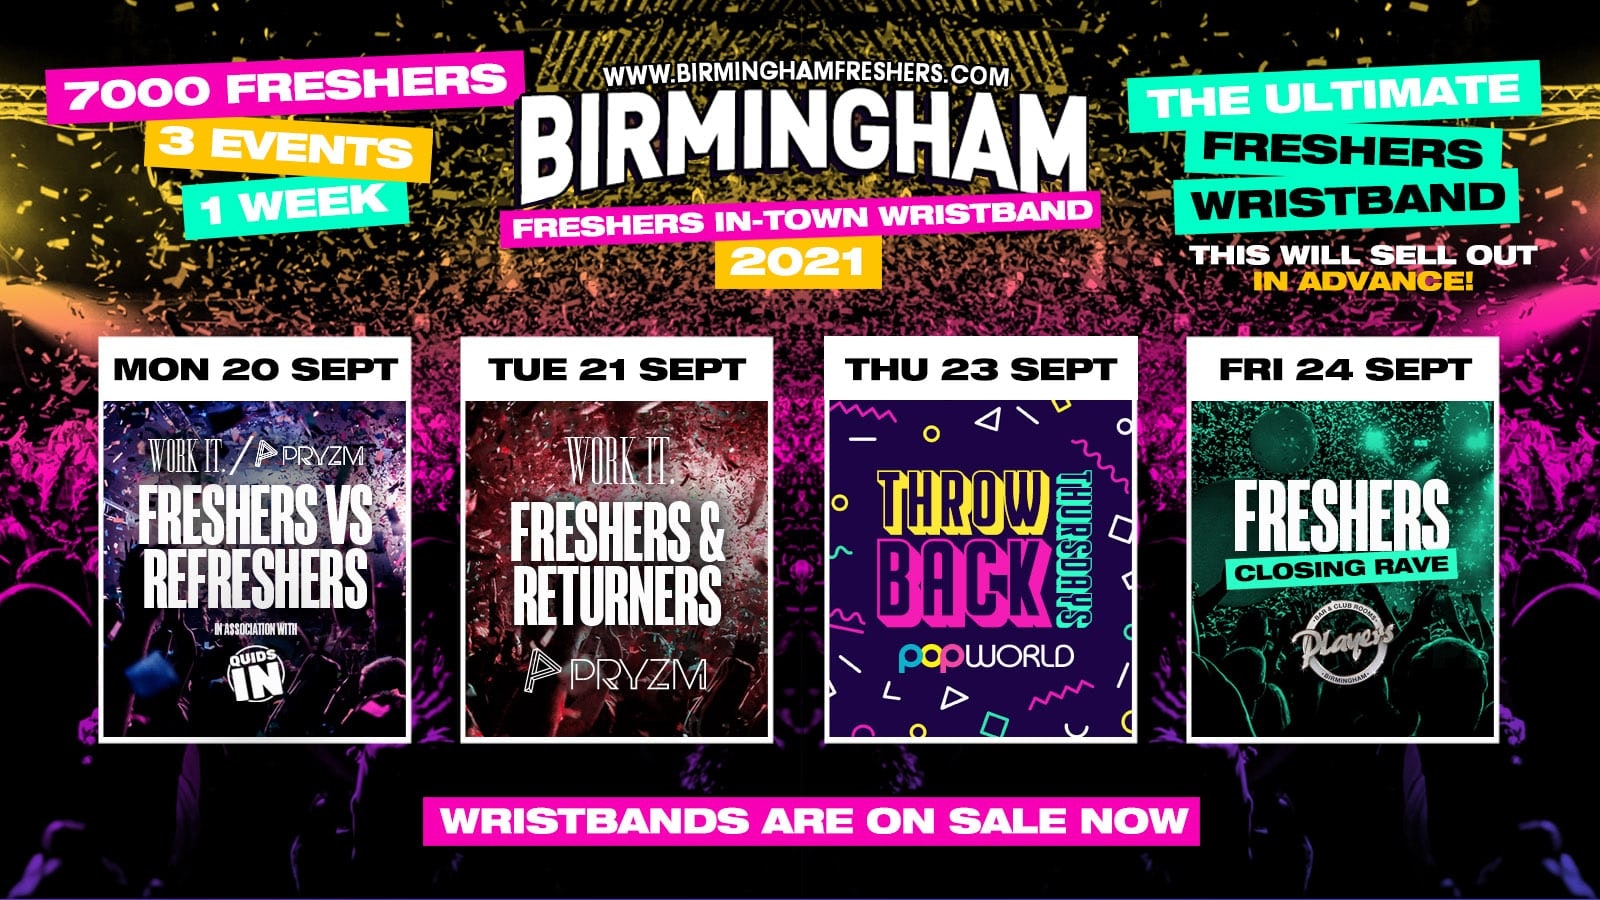 Birmingham Freshers Wristband 2021 – The Official Freshers Pass | Includes the biggest events in Birmingham – 2nd & 3rd Years Tickets!